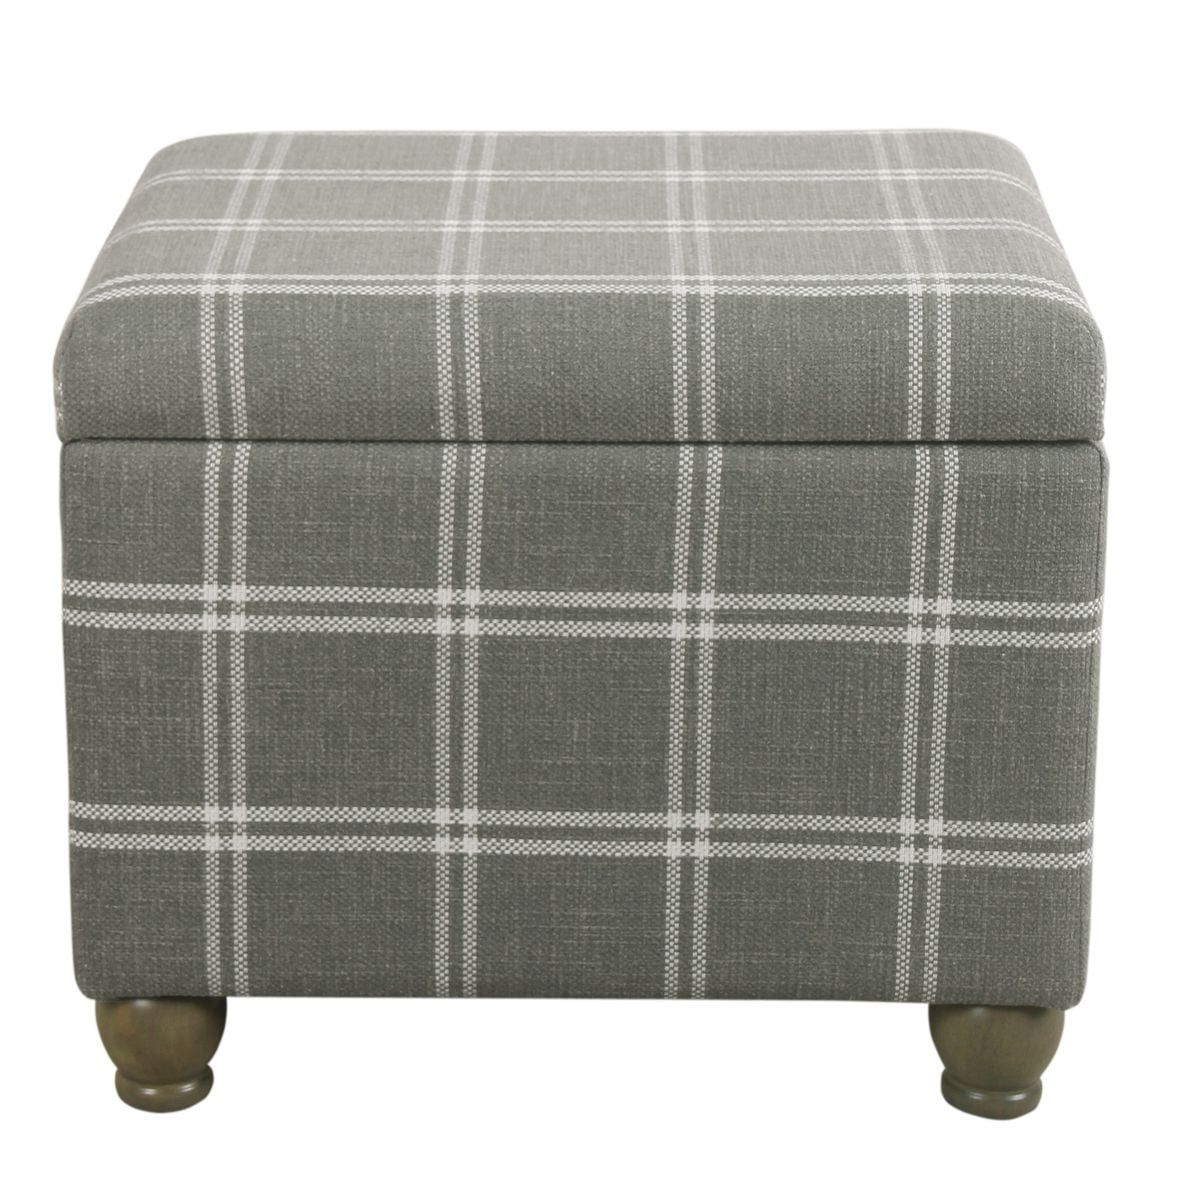 Newest Porch & Den Bohmann Ash Grey Geometric Storage Ottoman – On Sale –  Overstock – 27425567 Pertaining To Geometric Gray Ottomans (View 6 of 10)